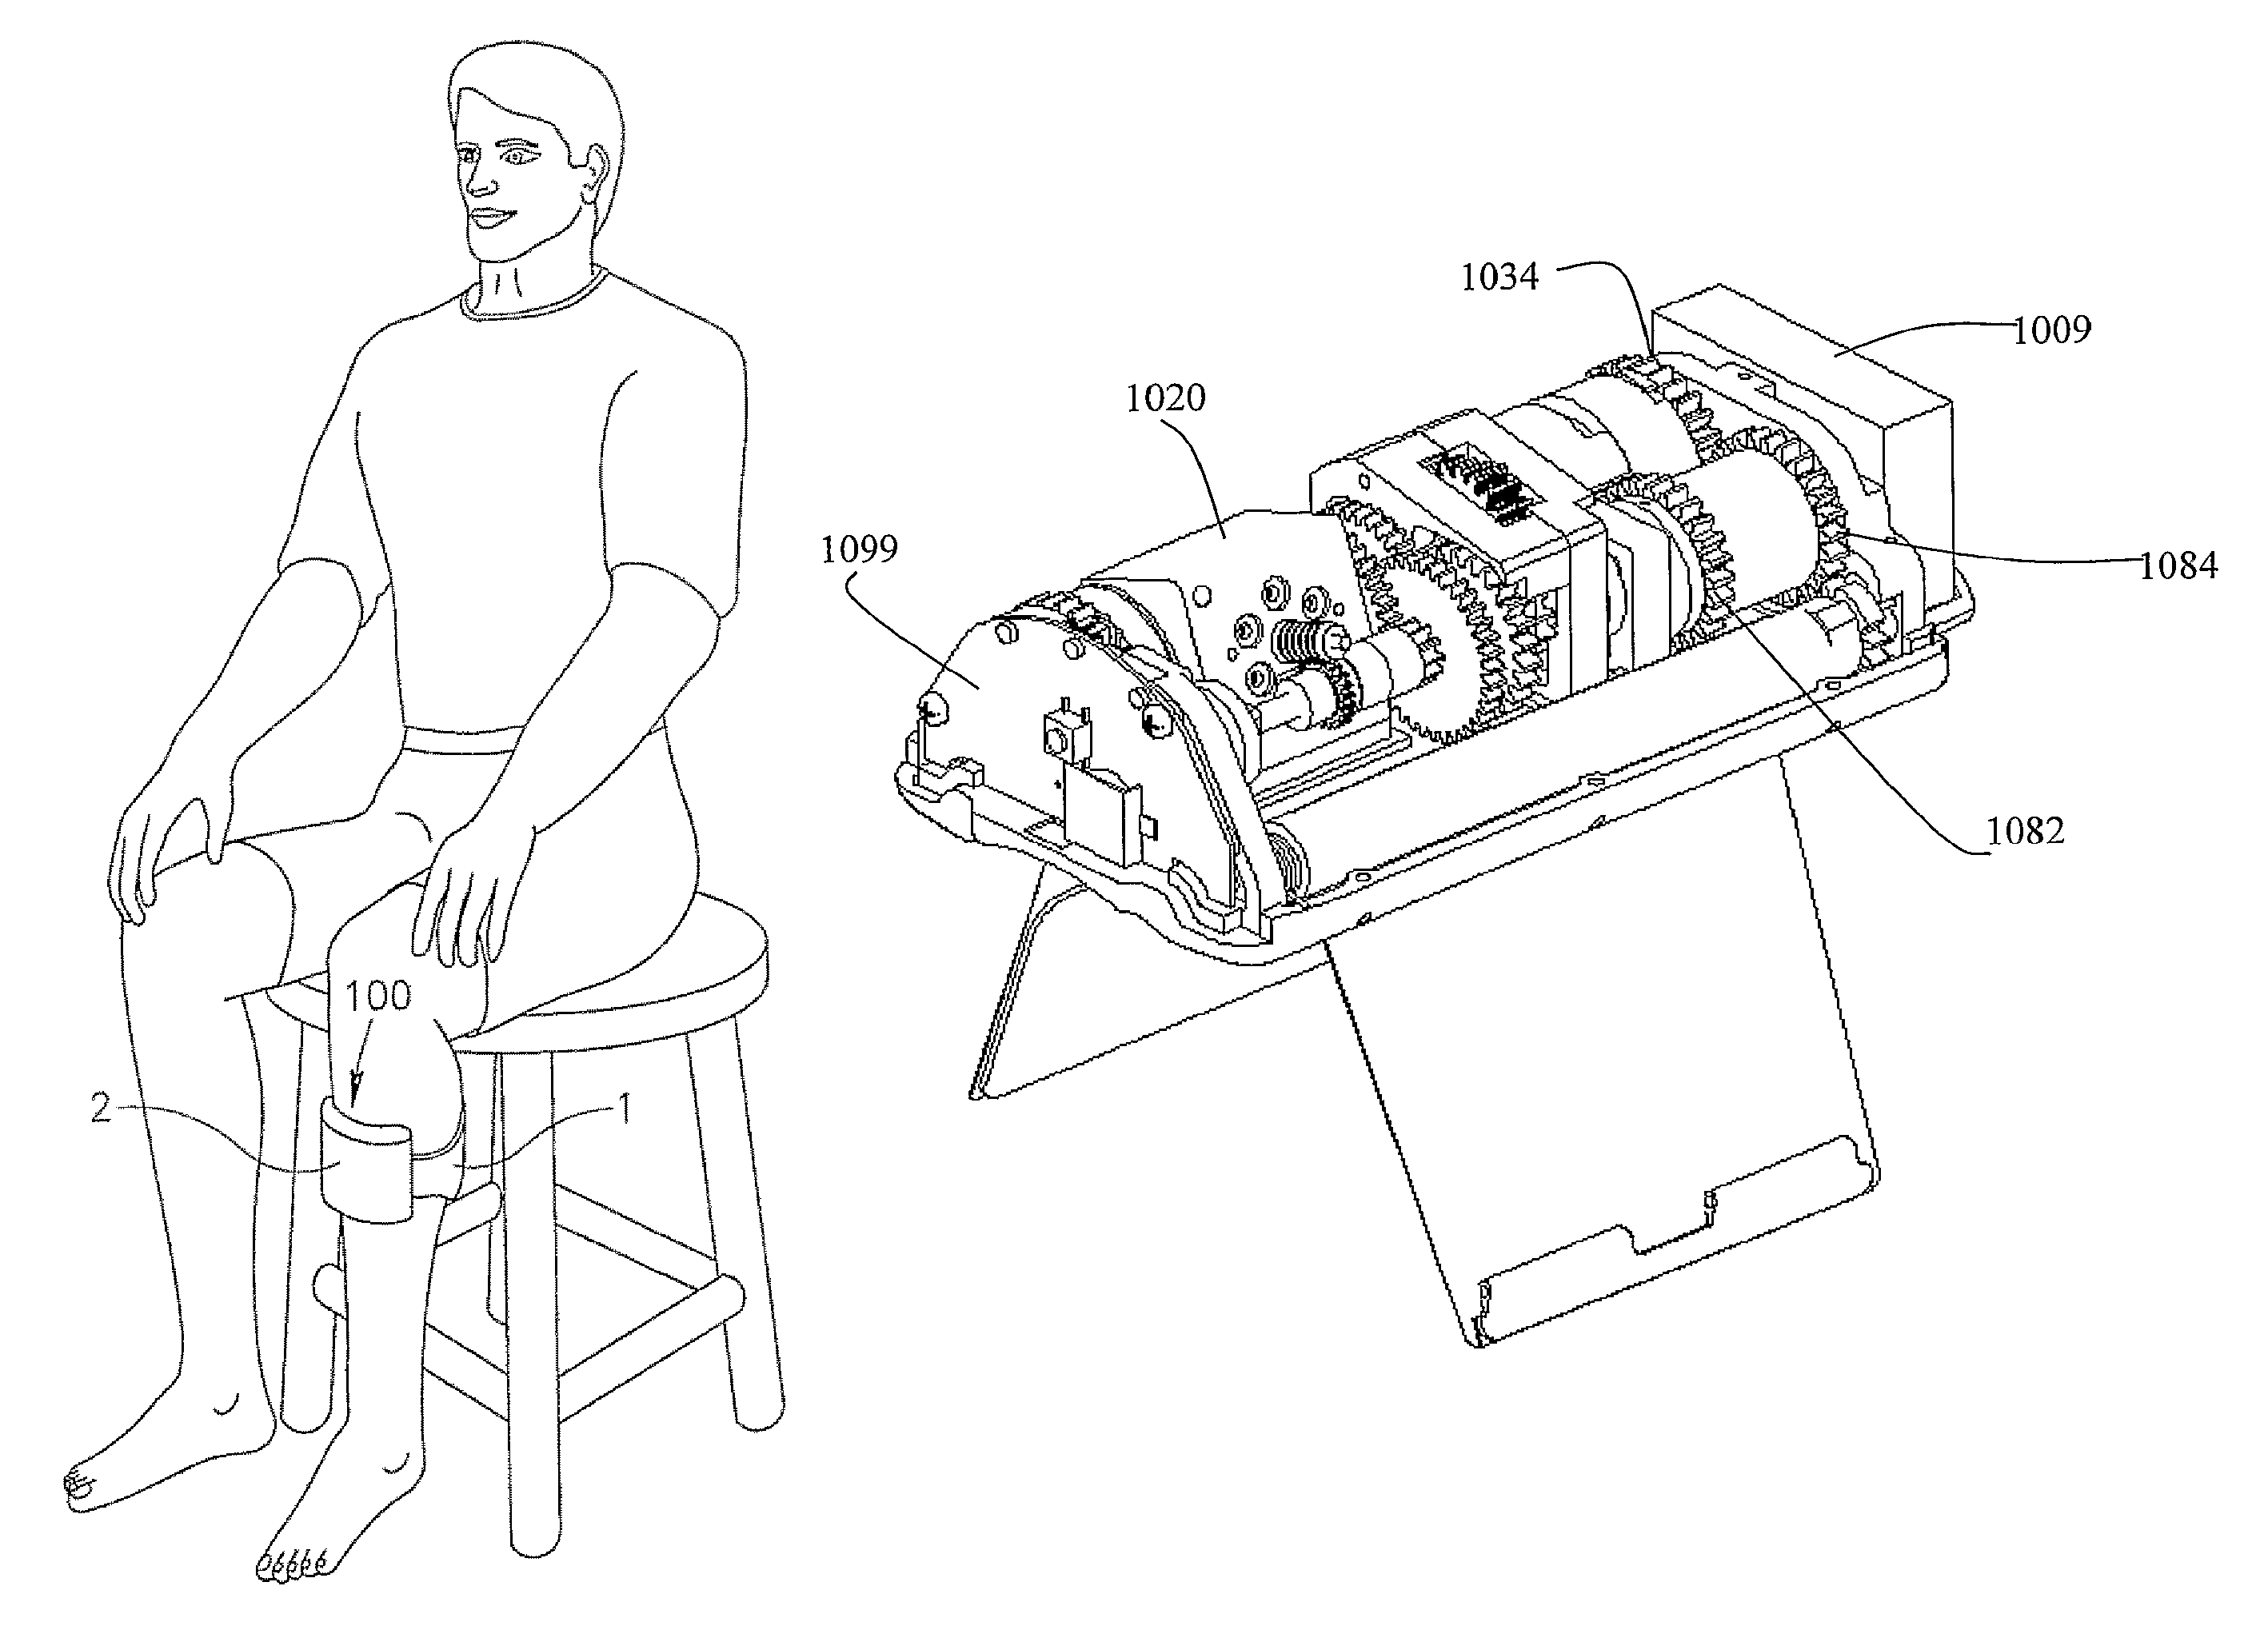 Portable self-contained device for enhancing circulation